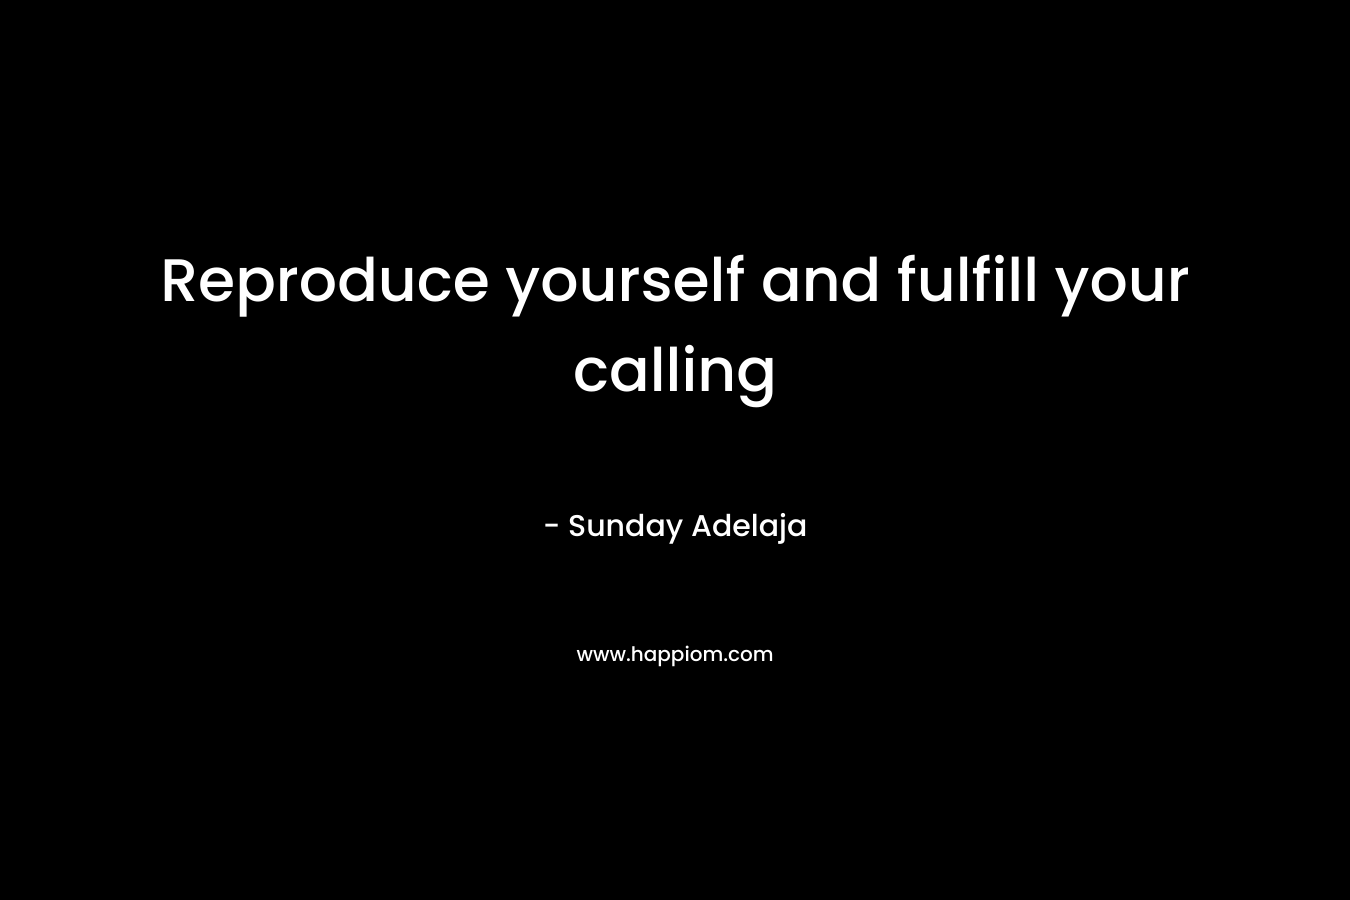 Reproduce yourself and fulfill your calling